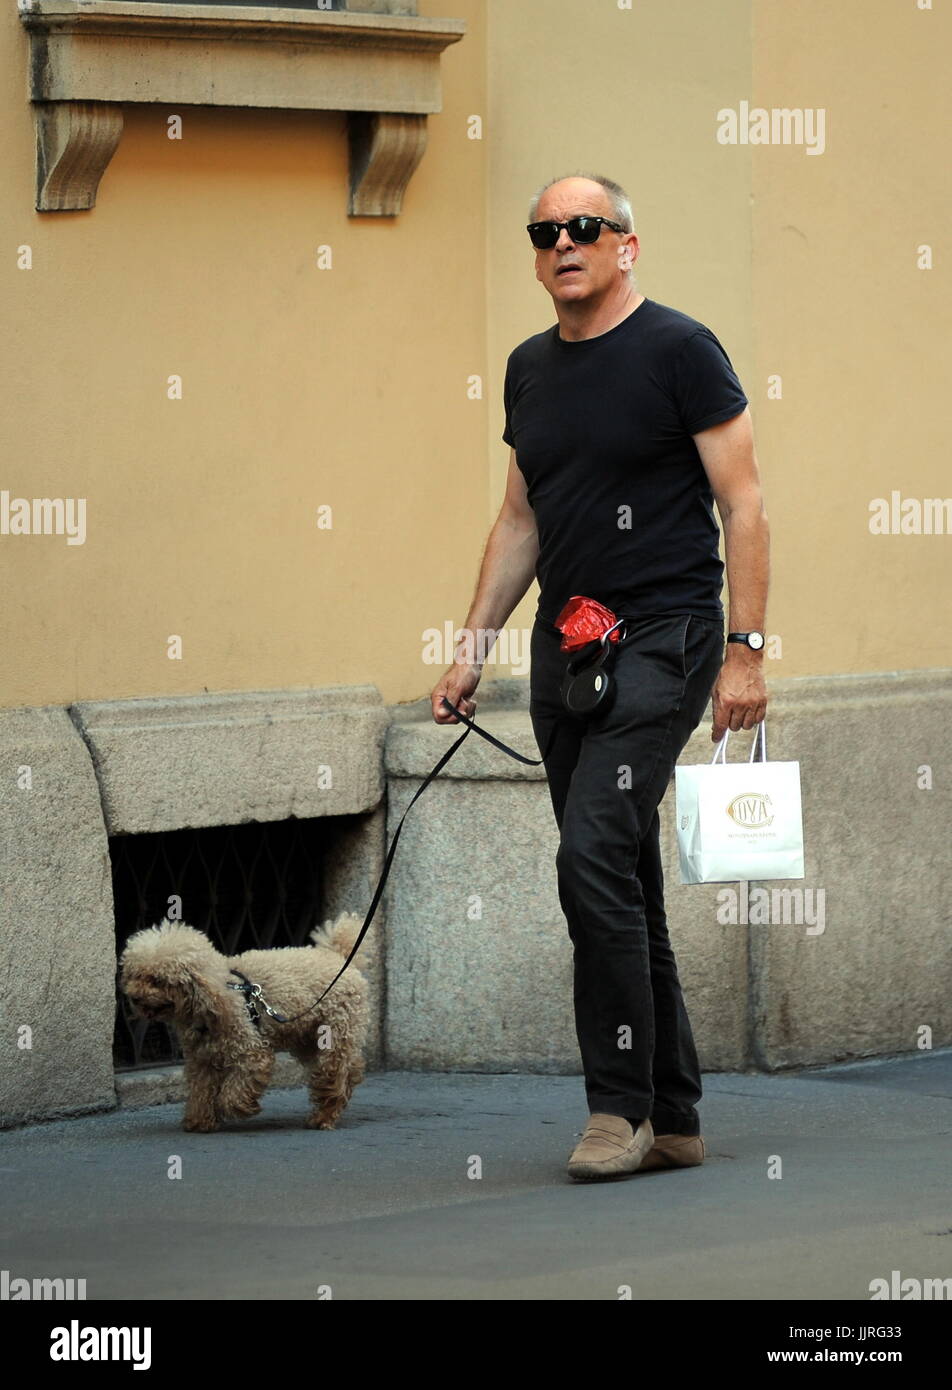 Tomas Arana walking his dog in Milan  Featuring: Tomas Arana Where: Milan, Italy When: 19 Jun 2017 Credit: IPA/WENN.com  **Only available for publication in UK, USA, Germany, Austria, Switzerland** Stock Photo